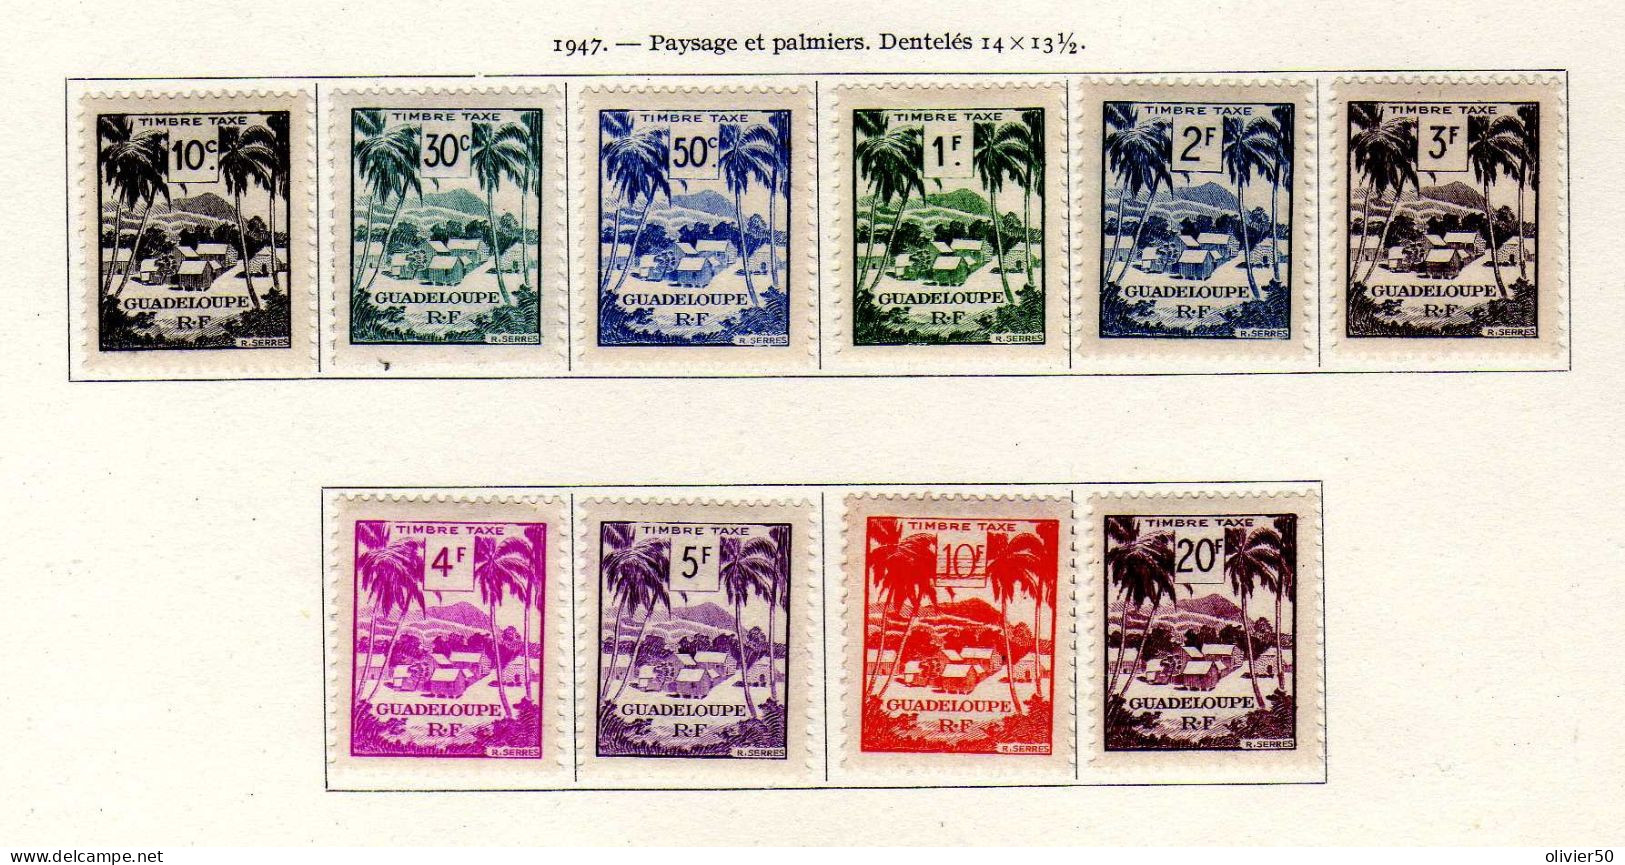 Guadeloupe - 1947 - Timbres-Taxe Palmiers - Neufs* - MH - Postage Due